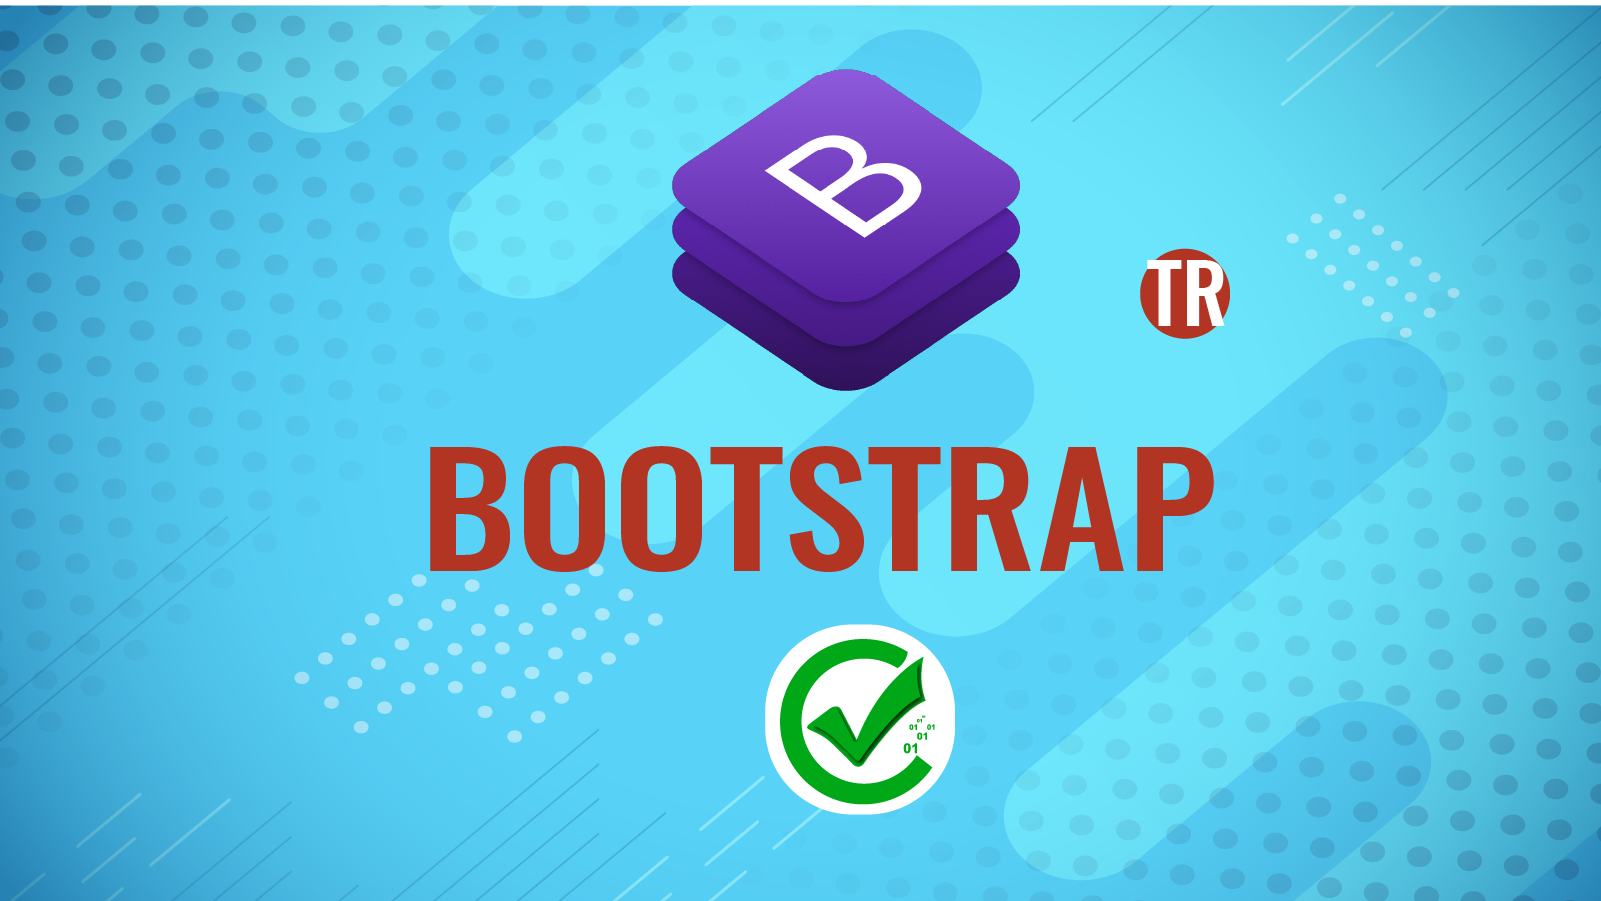 BOOTSTRAP 173 174 175 176 196